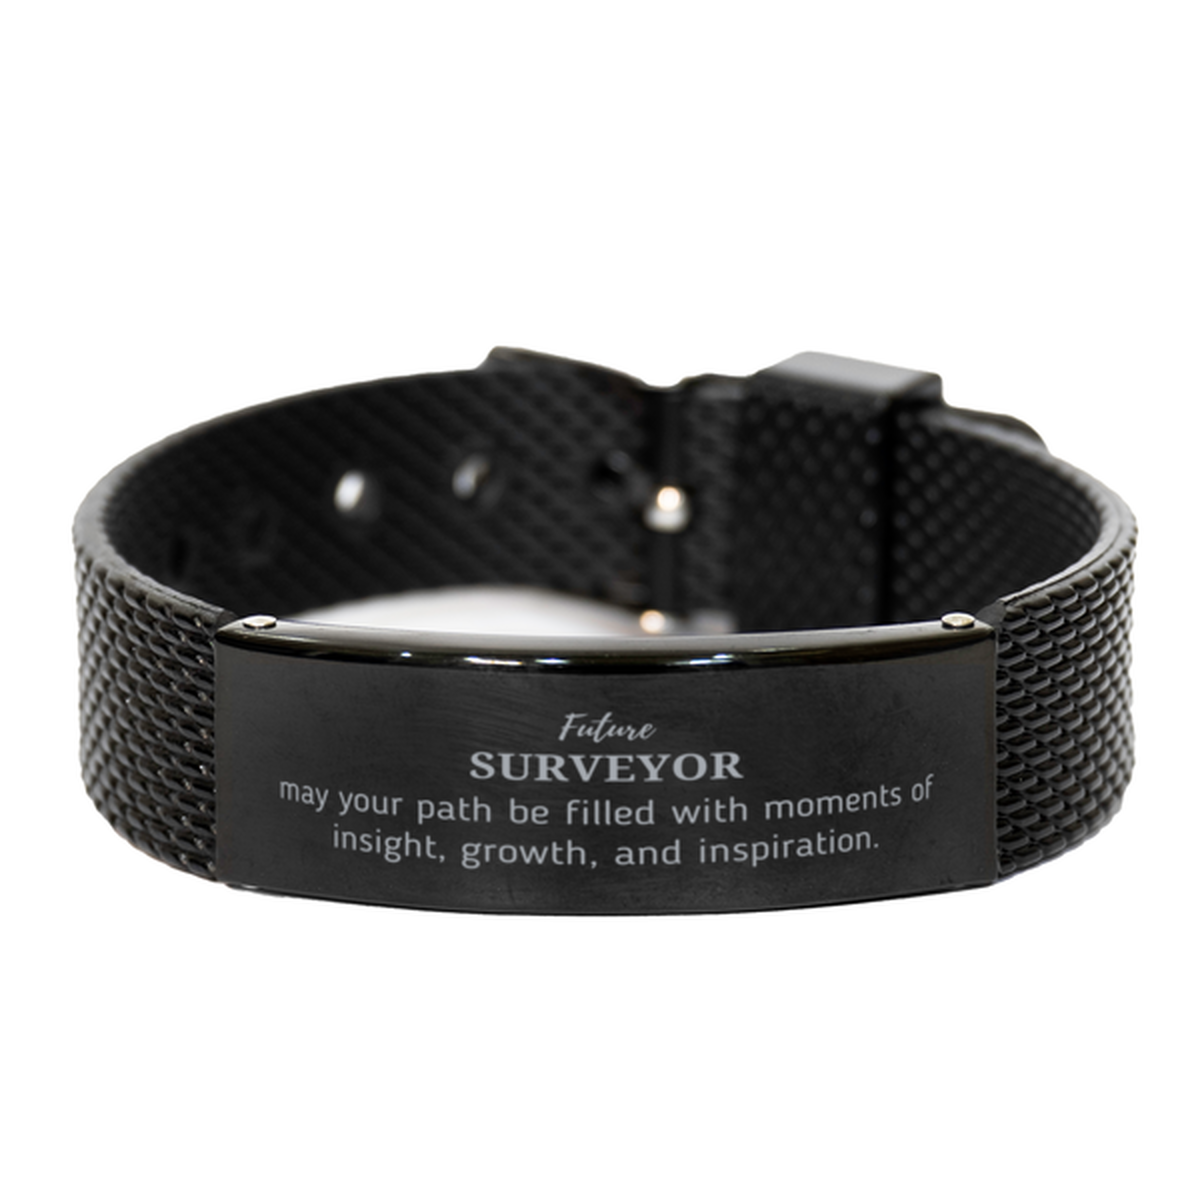 Future Surveyor Gifts, May your path be filled with moments of insight, Graduation Gifts for New Surveyor, Christmas Unique Black Shark Mesh Bracelet For Men, Women, Friends